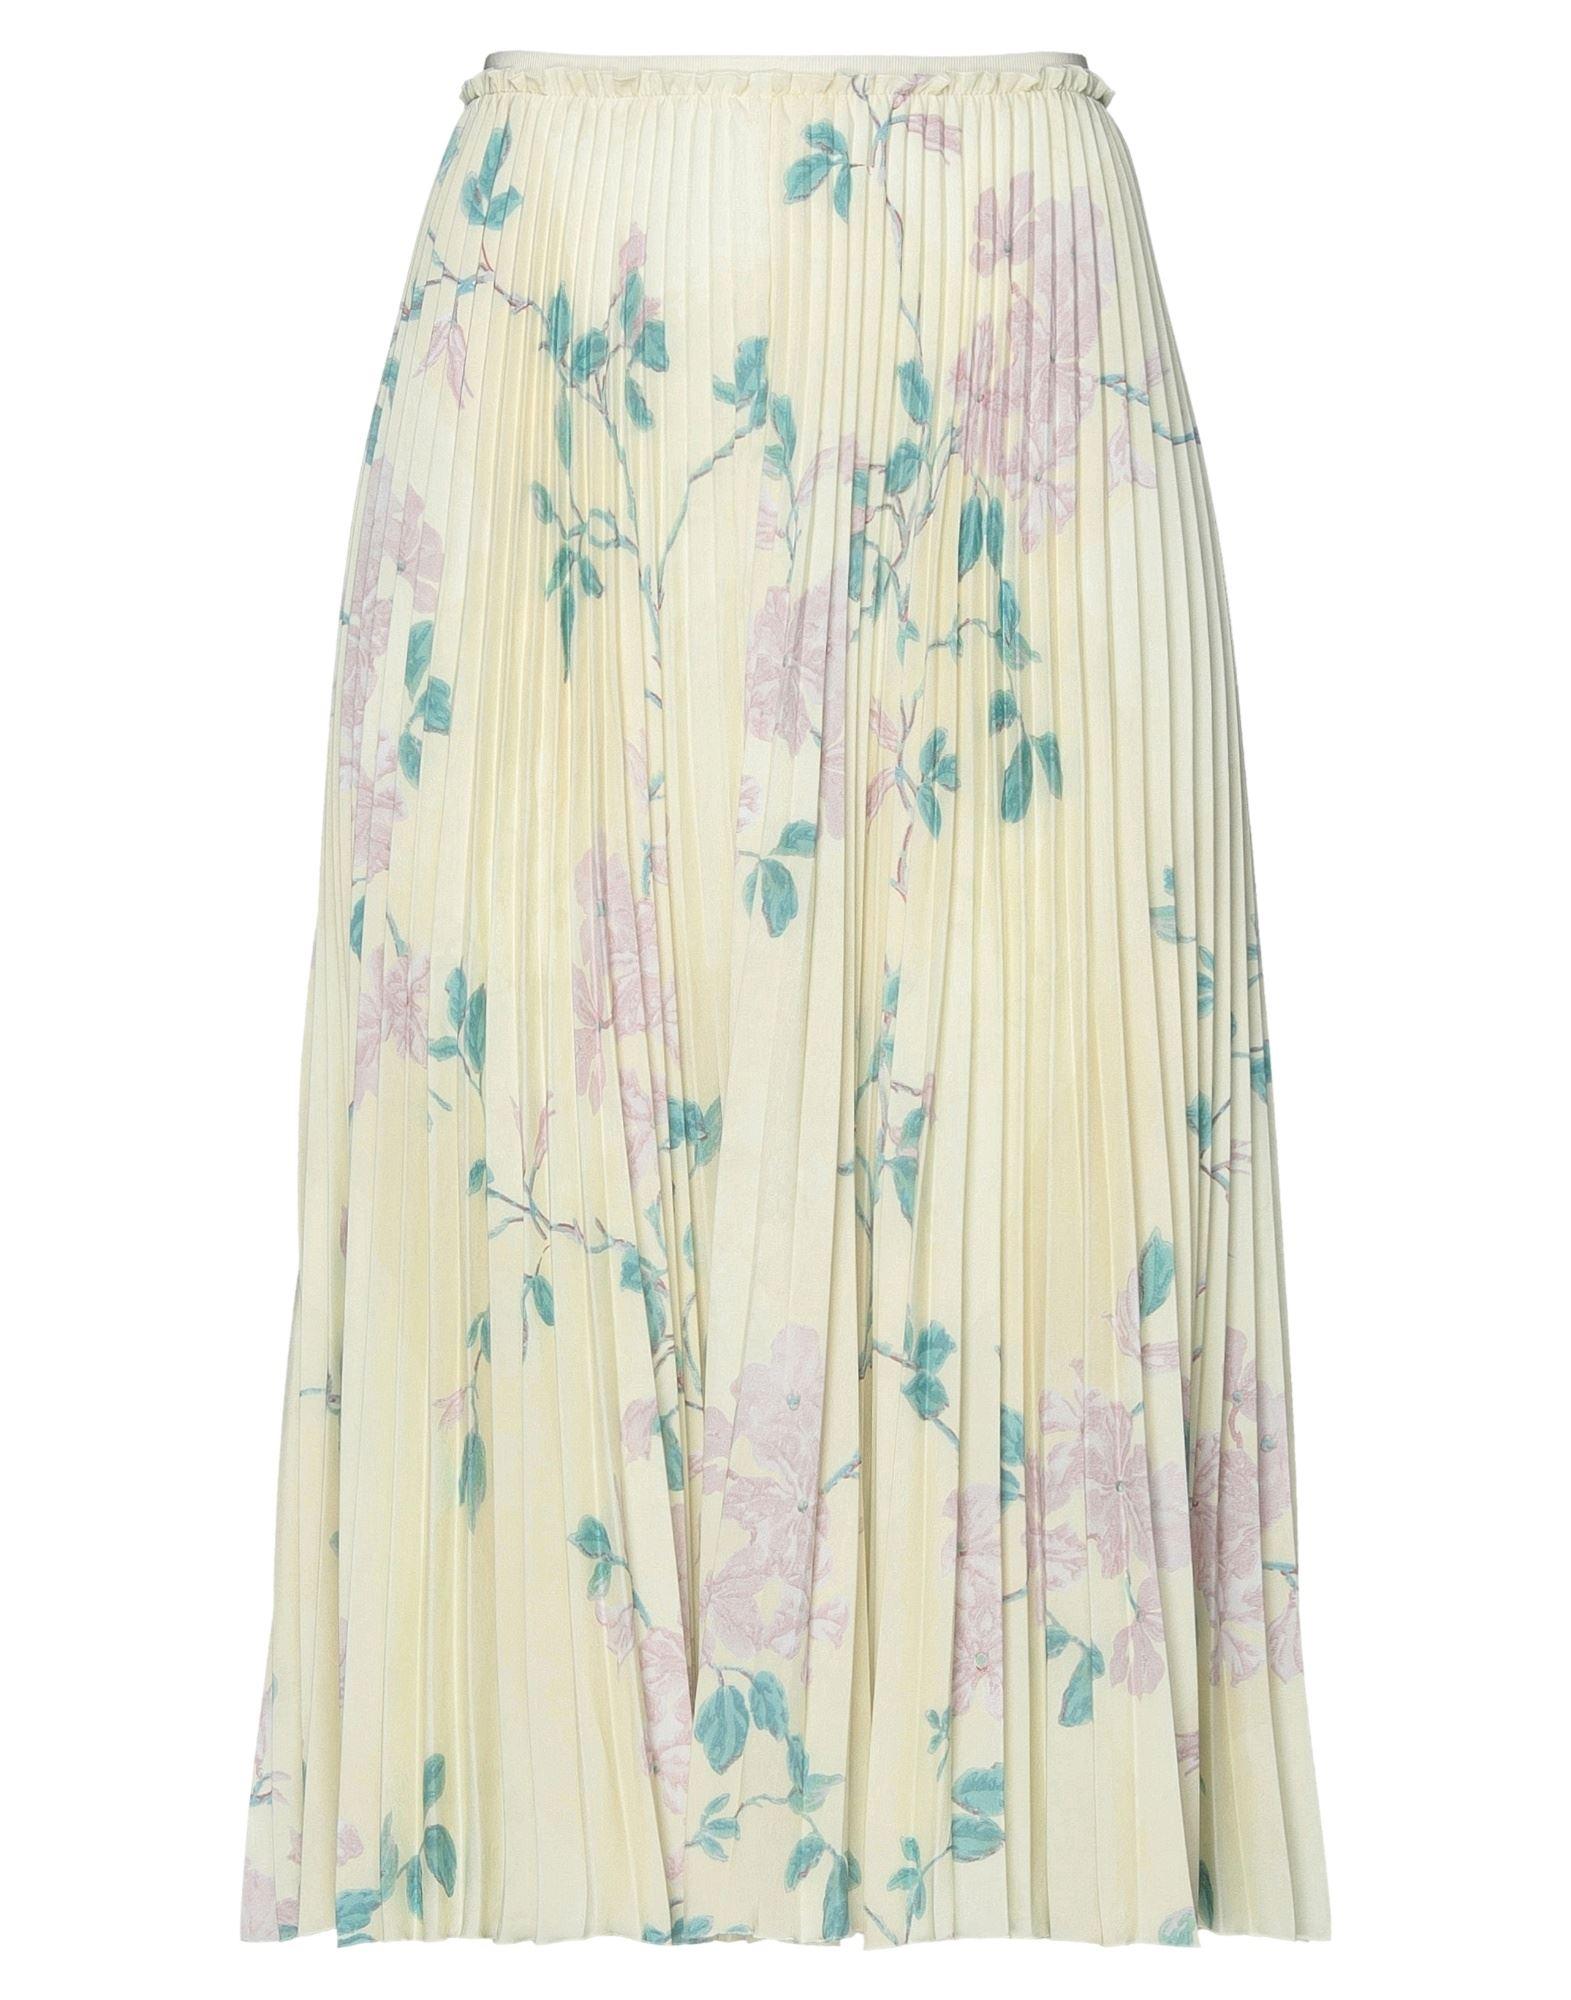 RED Valentino Synthetic Midi Skirt in Light Yellow (Yellow) - Lyst